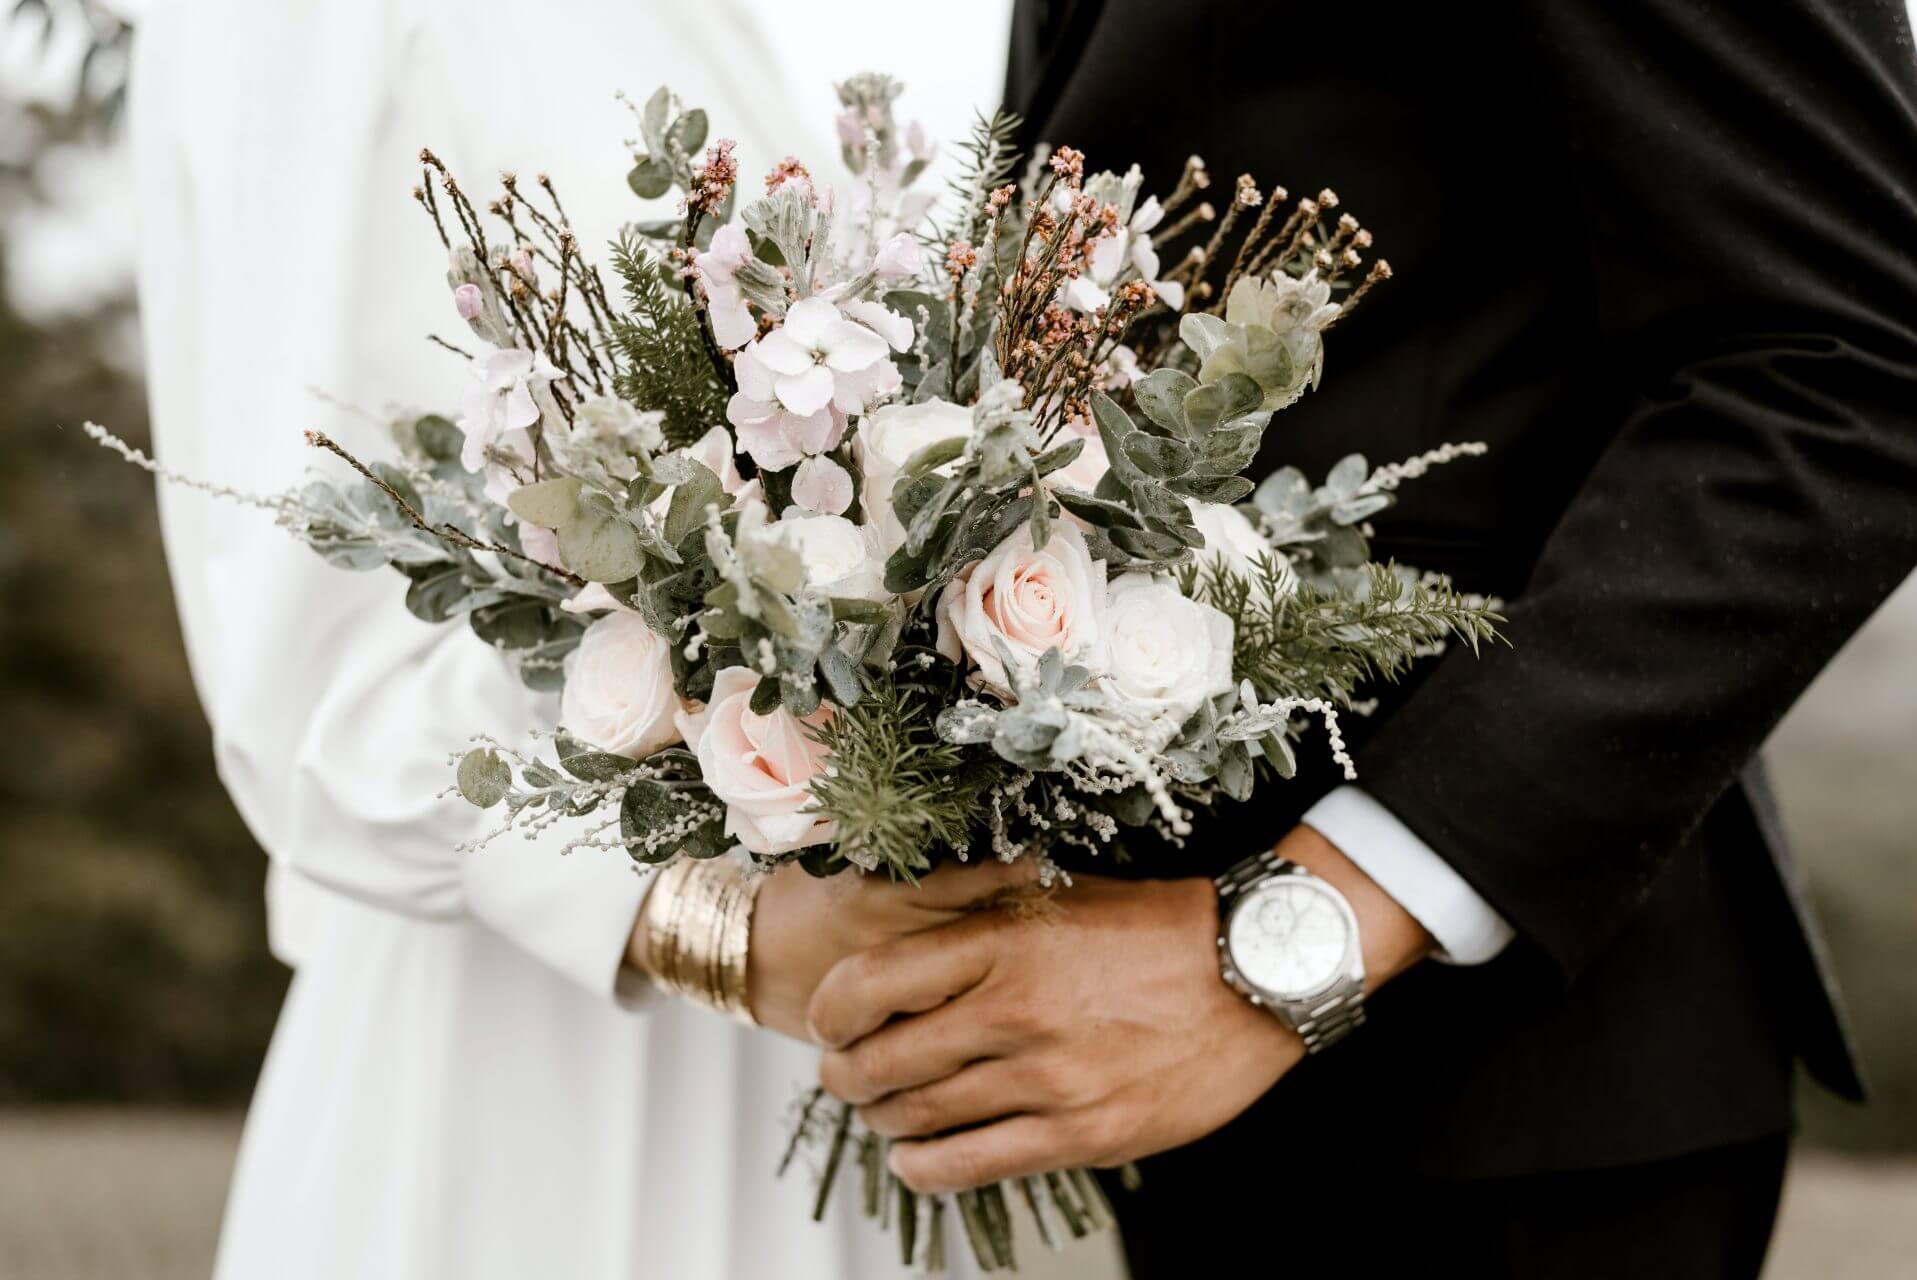 Choosing Flowers For Your Wedding